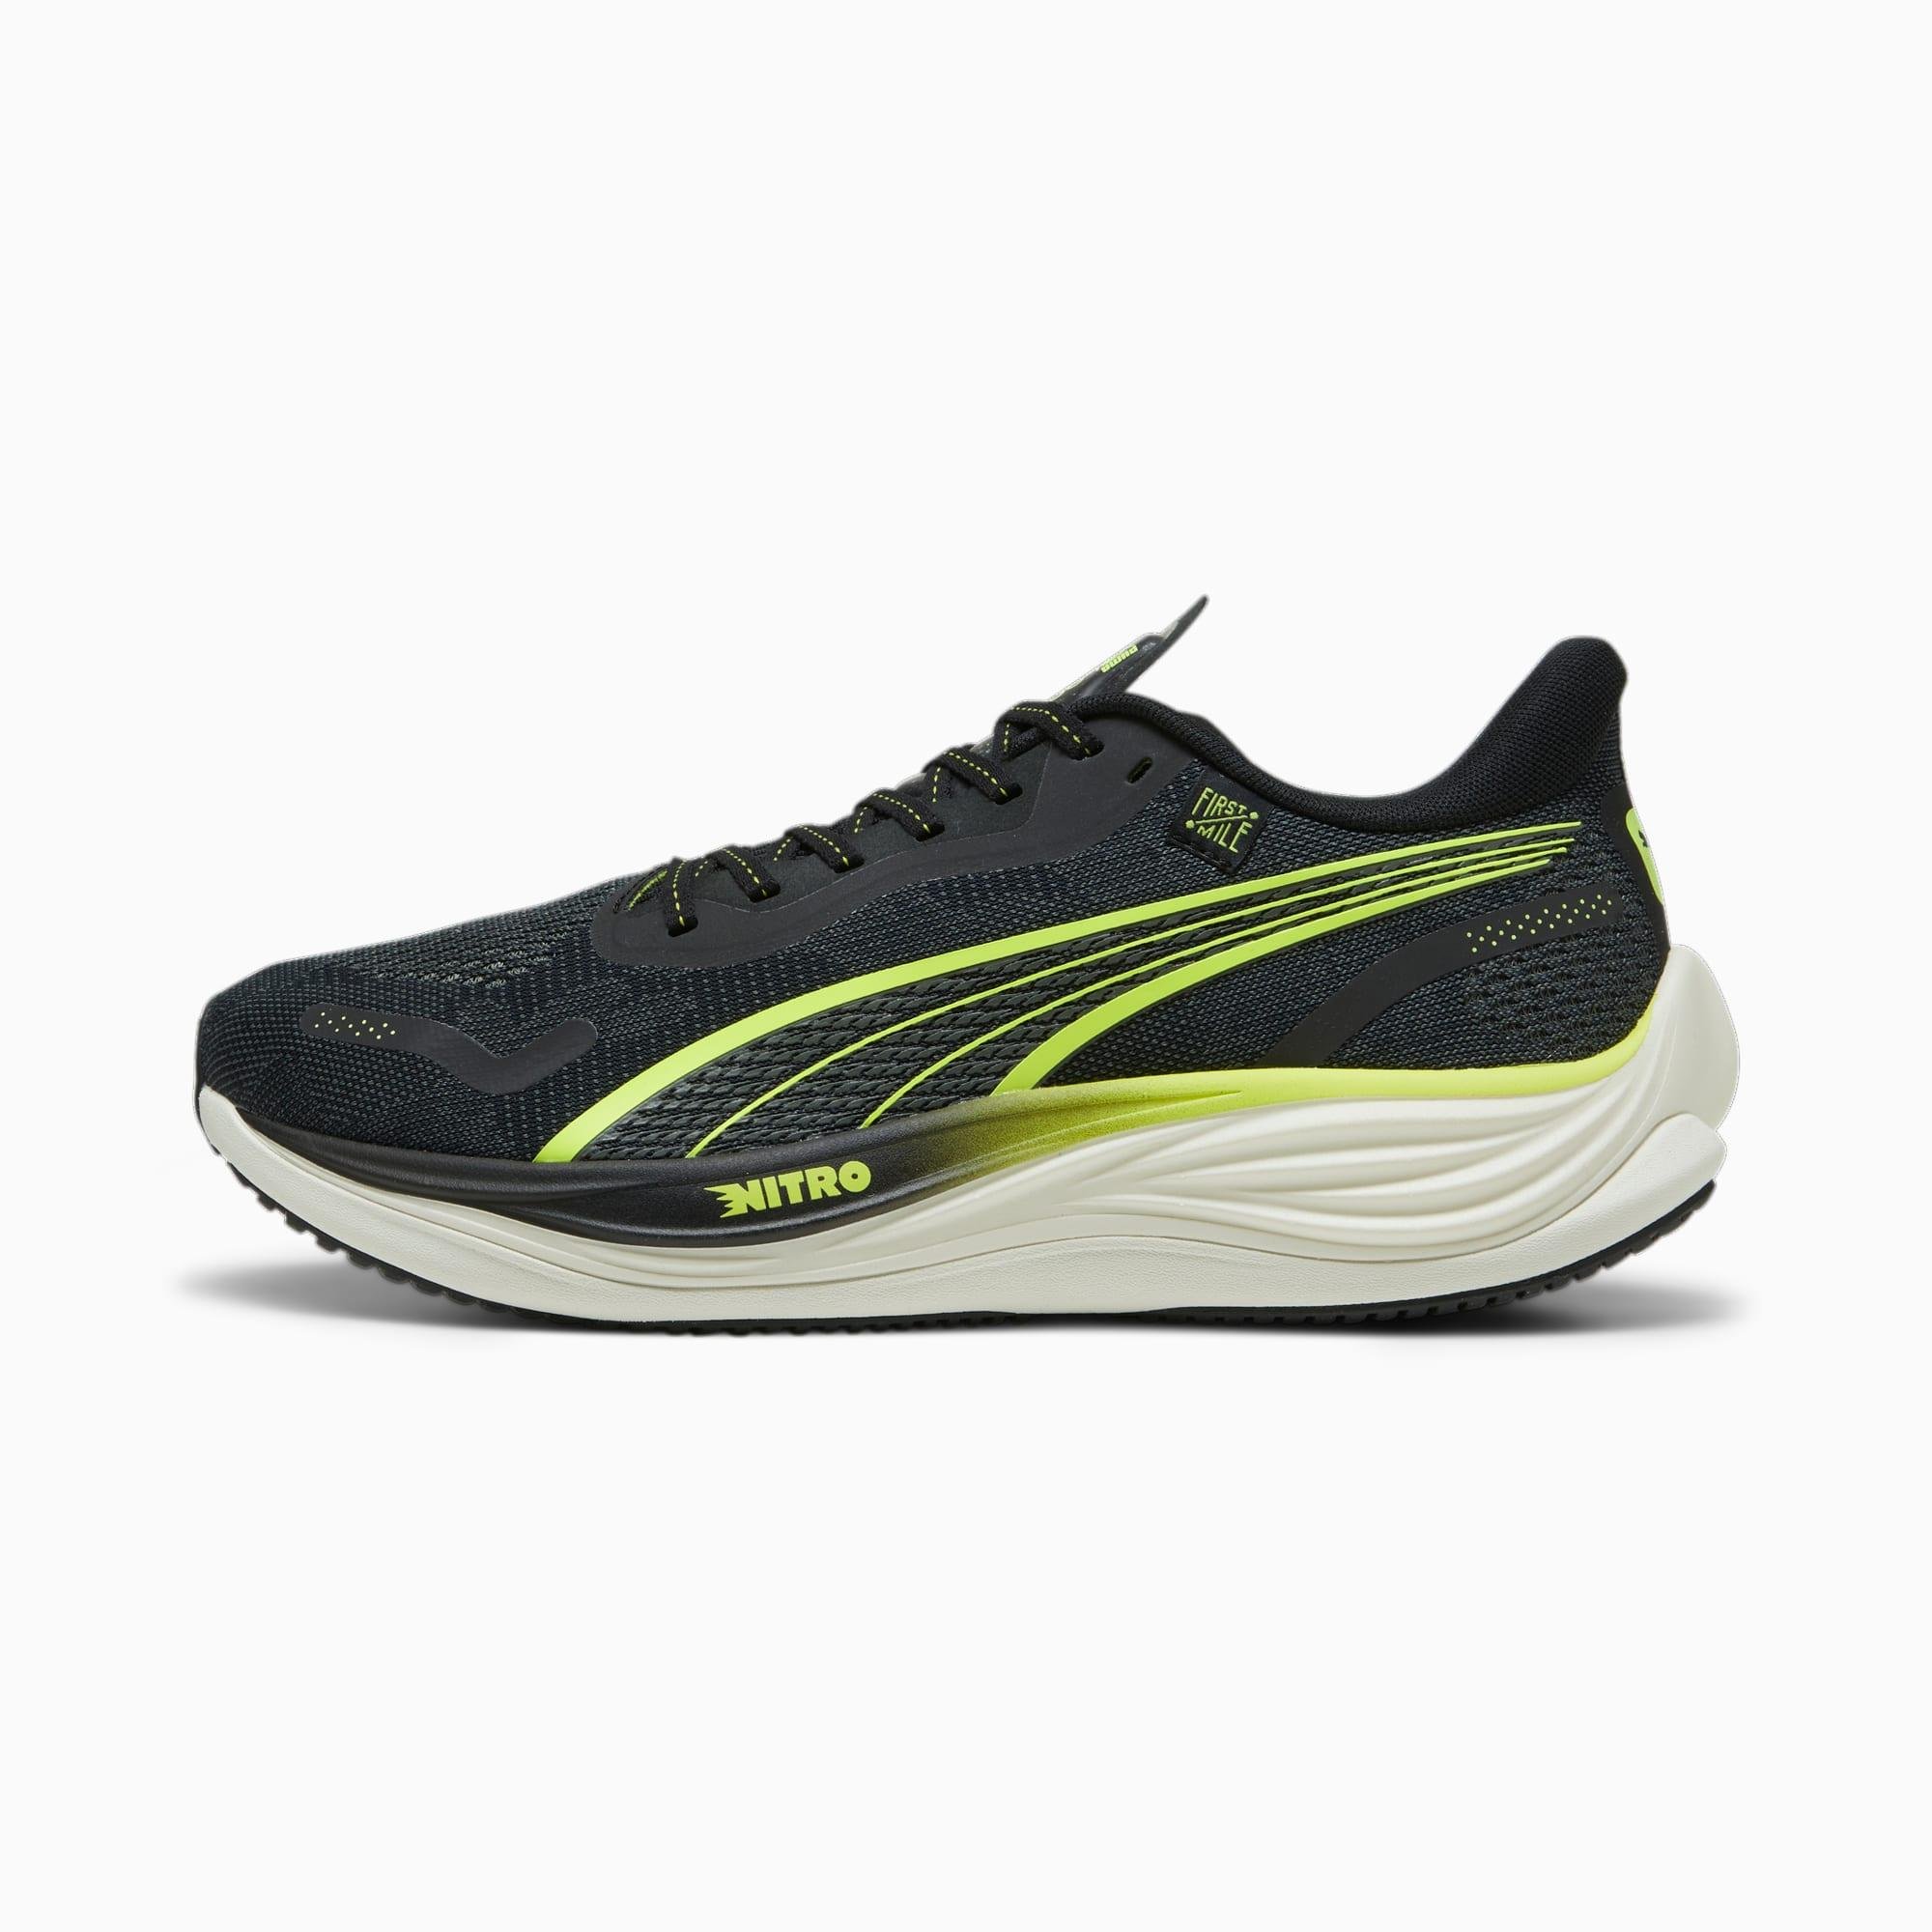 PUMA x First Mile Velocity NITRO™ 3 Men's Running Shoes by PUMA